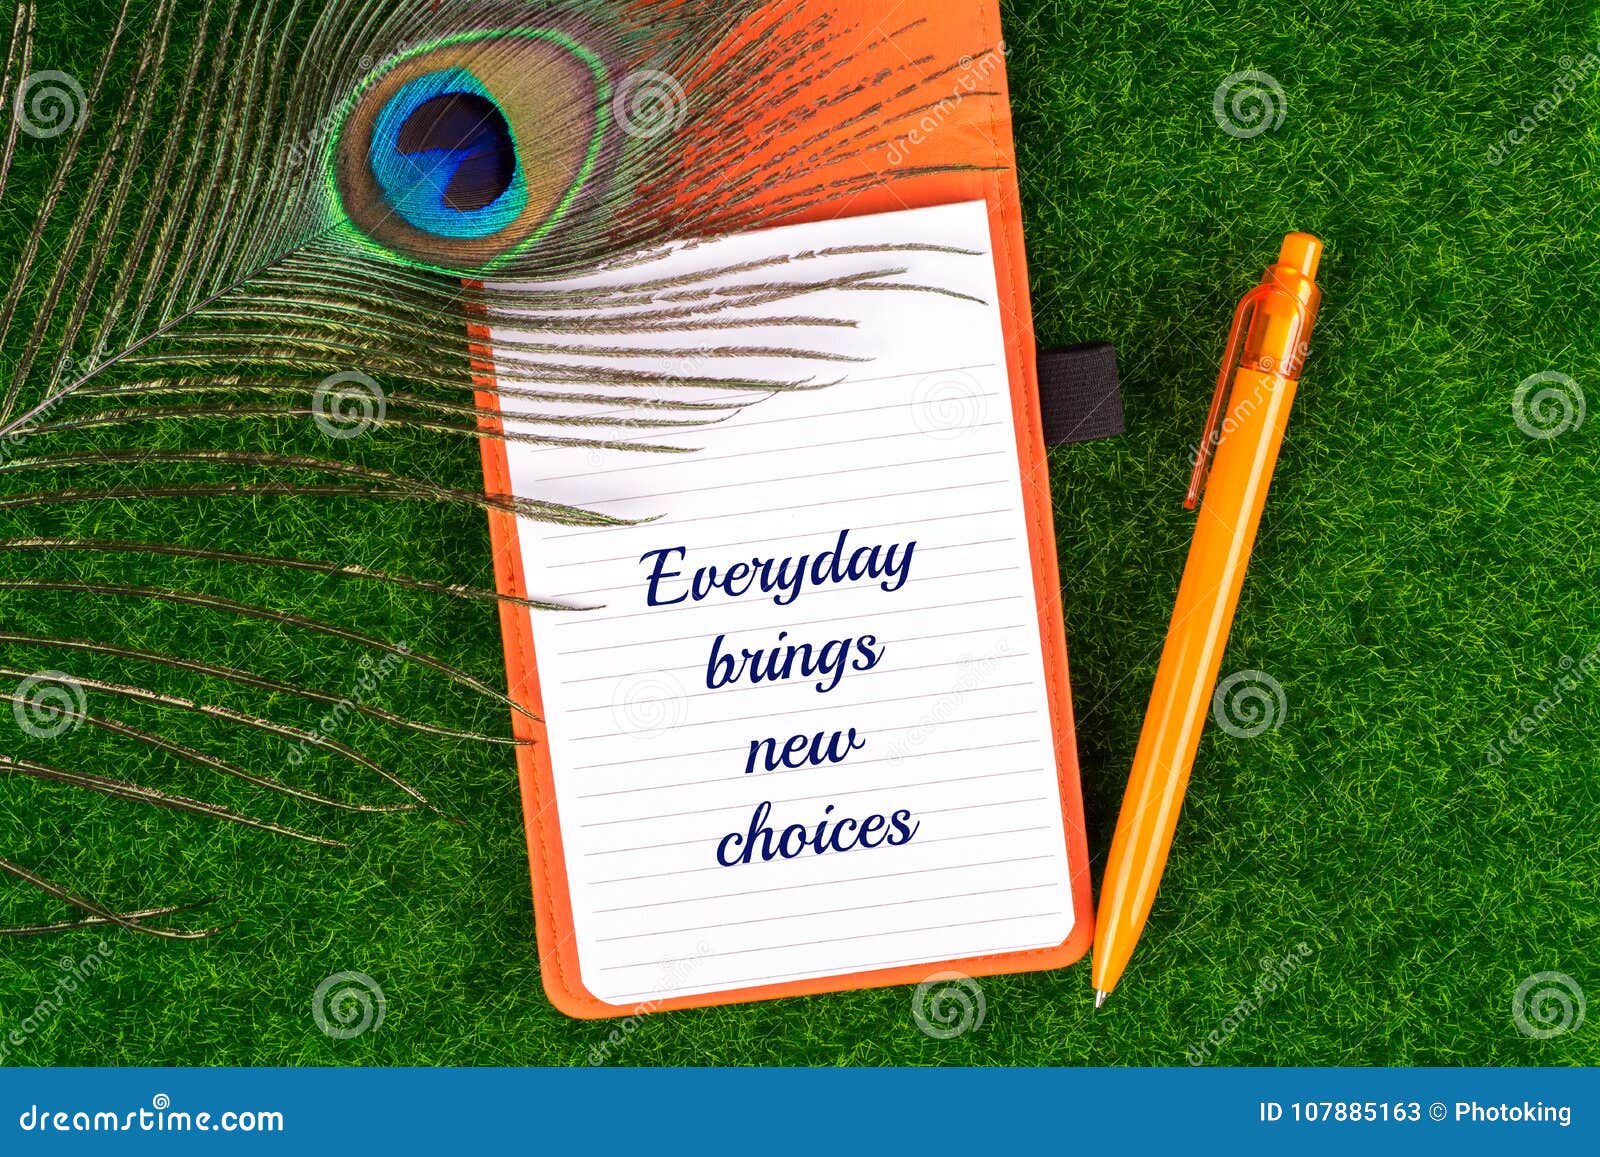 everyday brings new choices